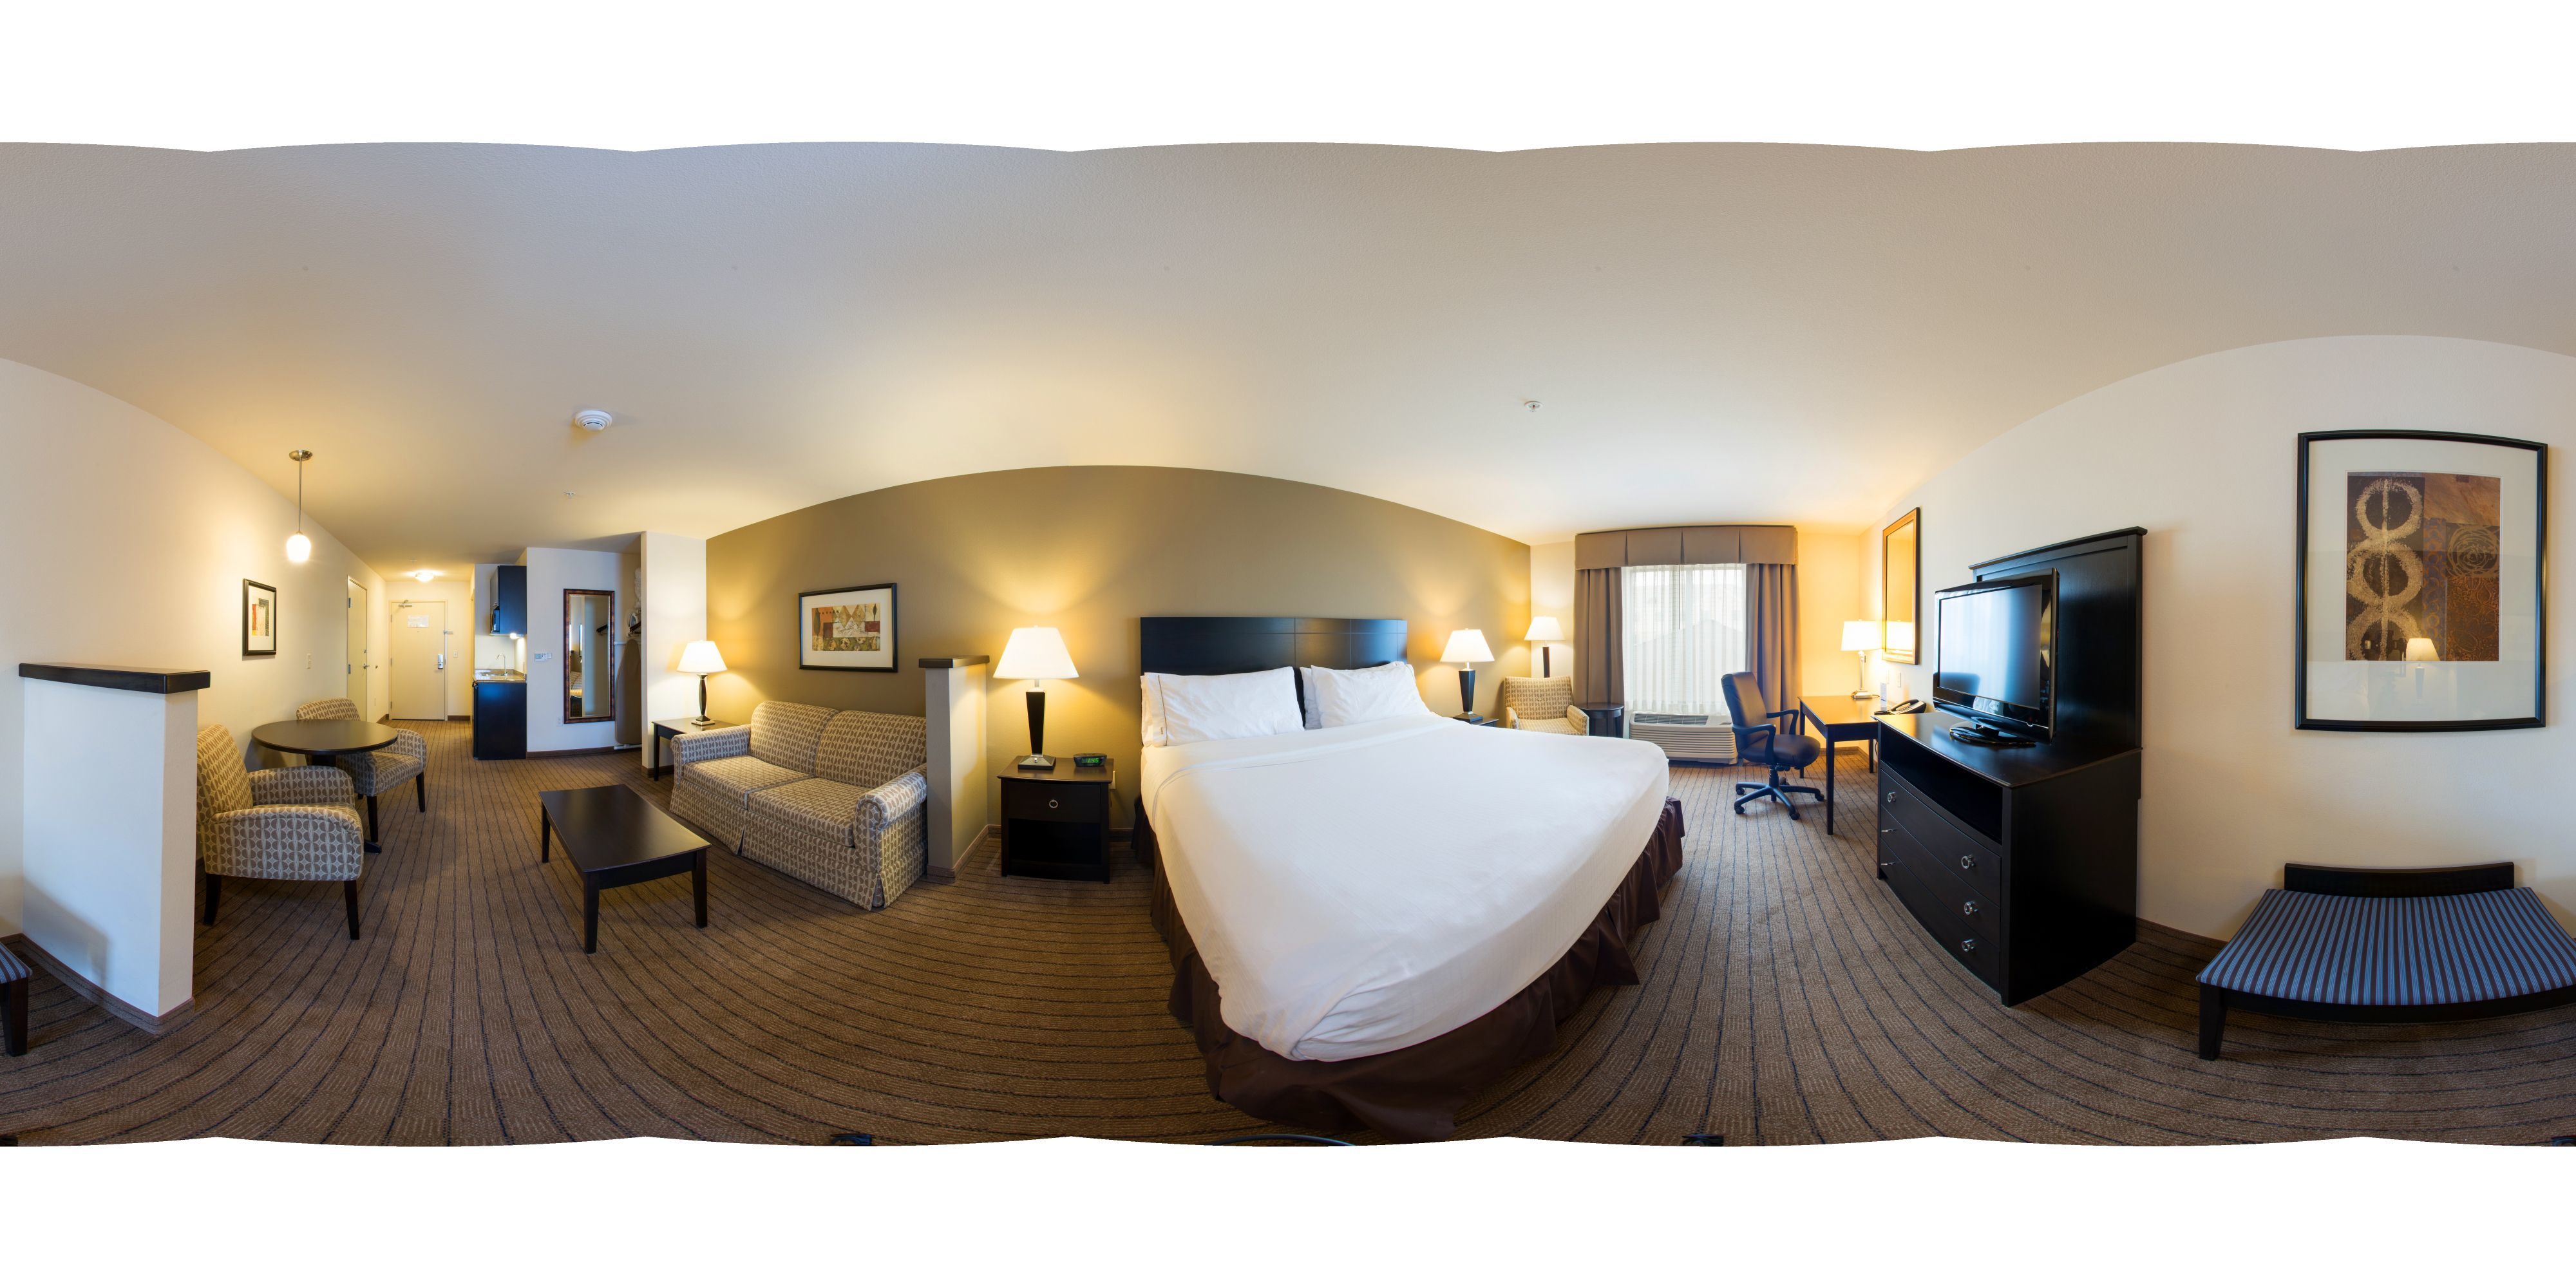 Holiday Inn Express & Suites El Paso Airport, an Ihg Hotel